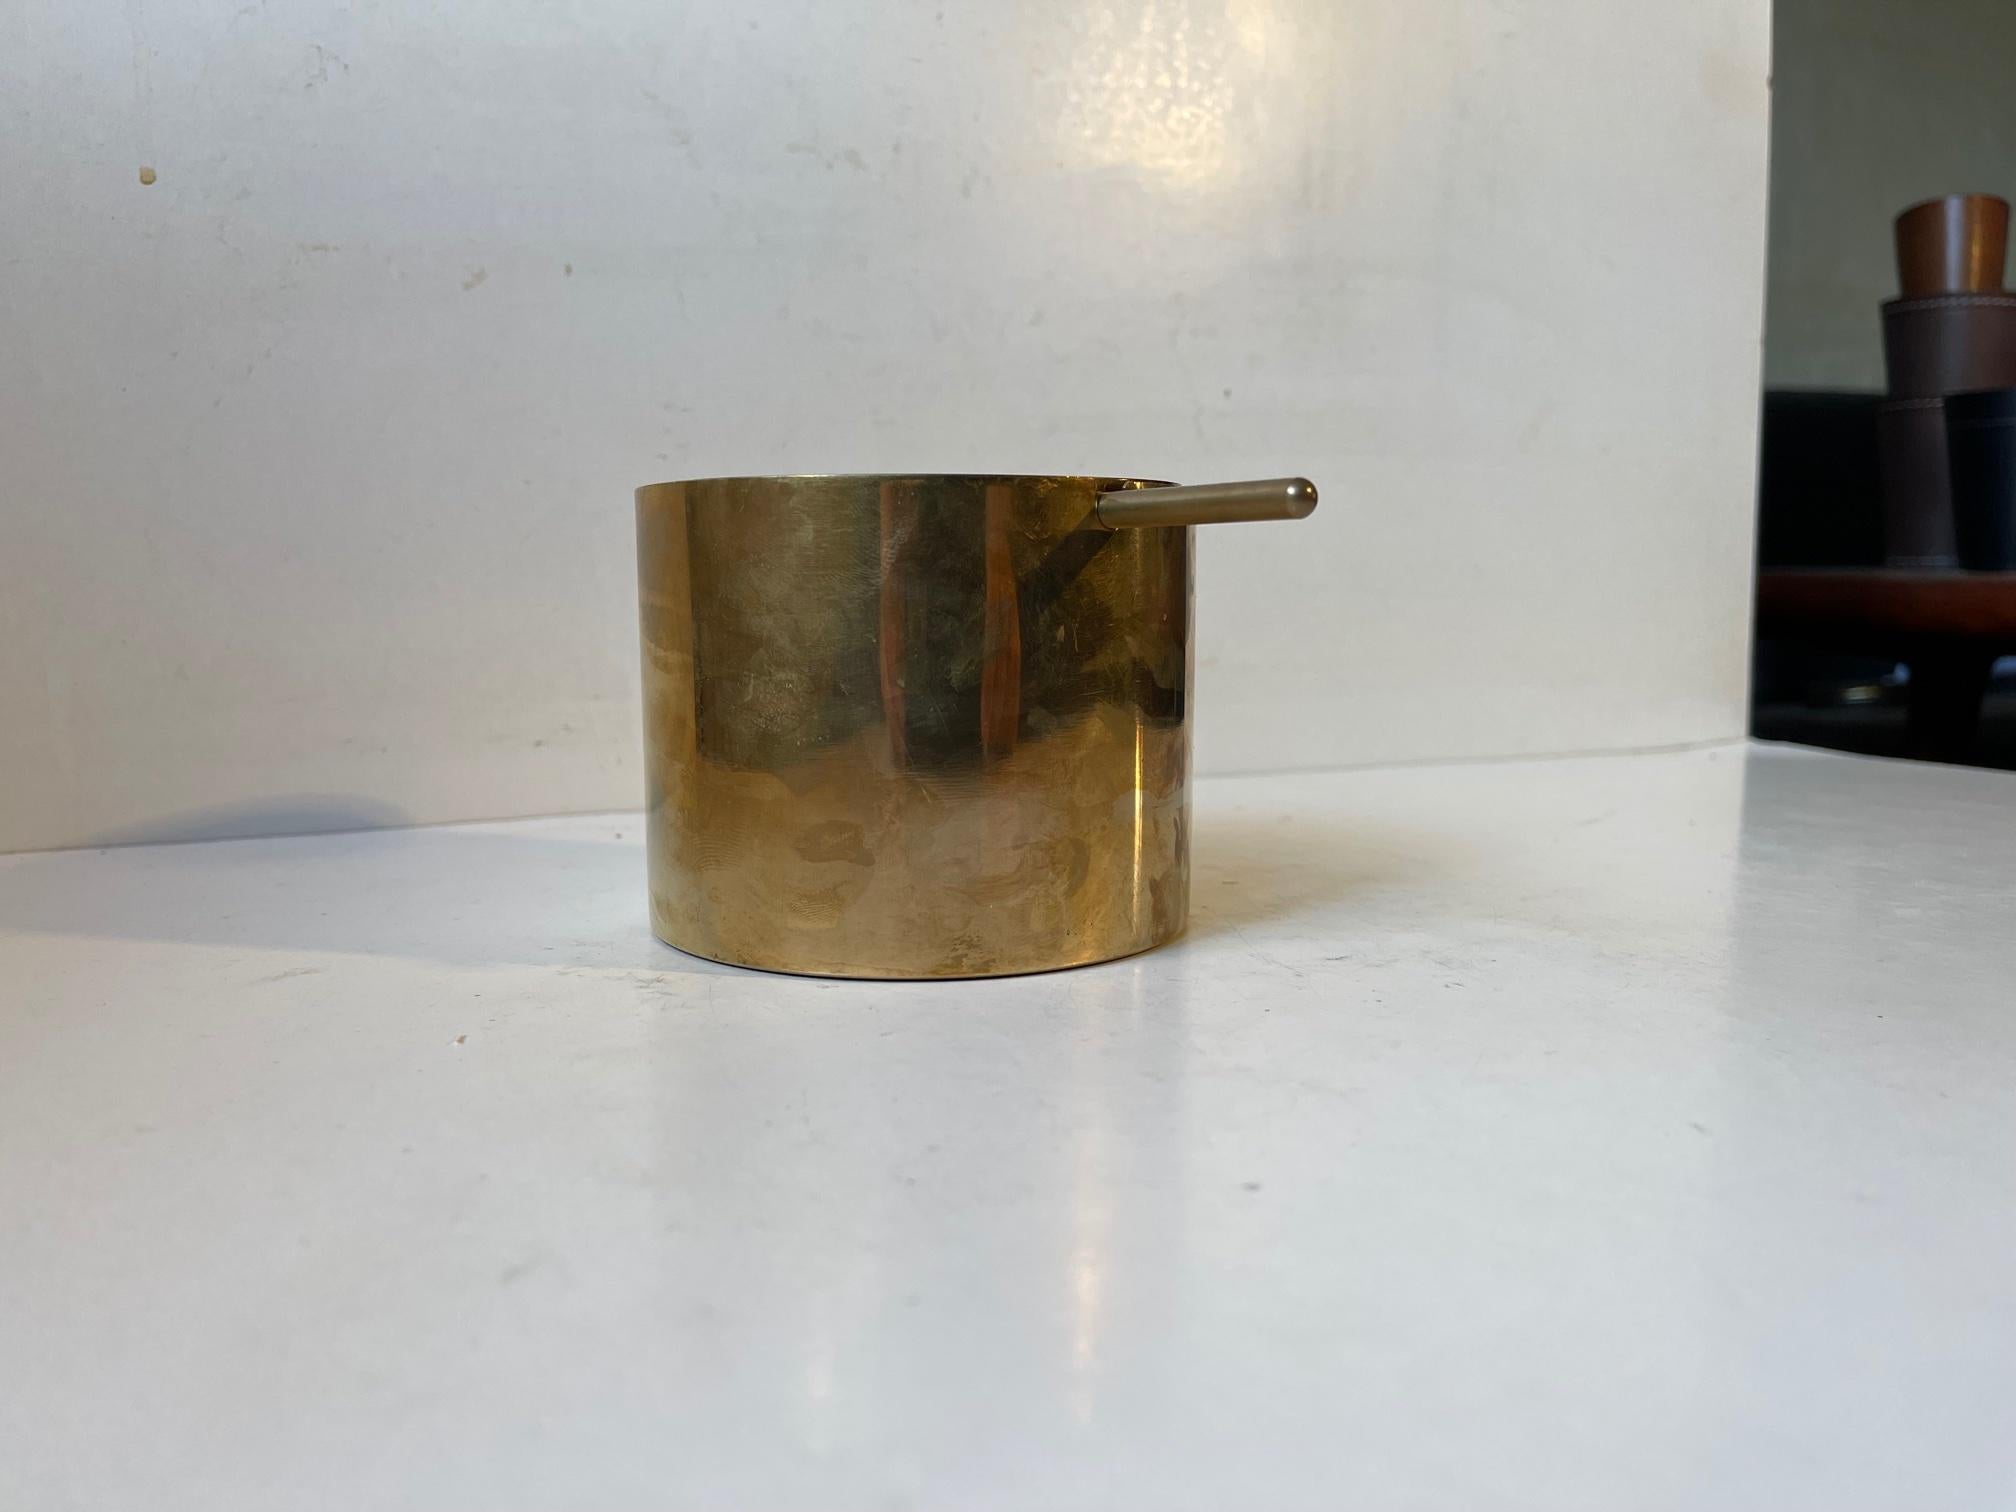 Large Brass Ashtray Cylinda-Line by Arne Jacobsen for Stelton, 1960s For Sale 4